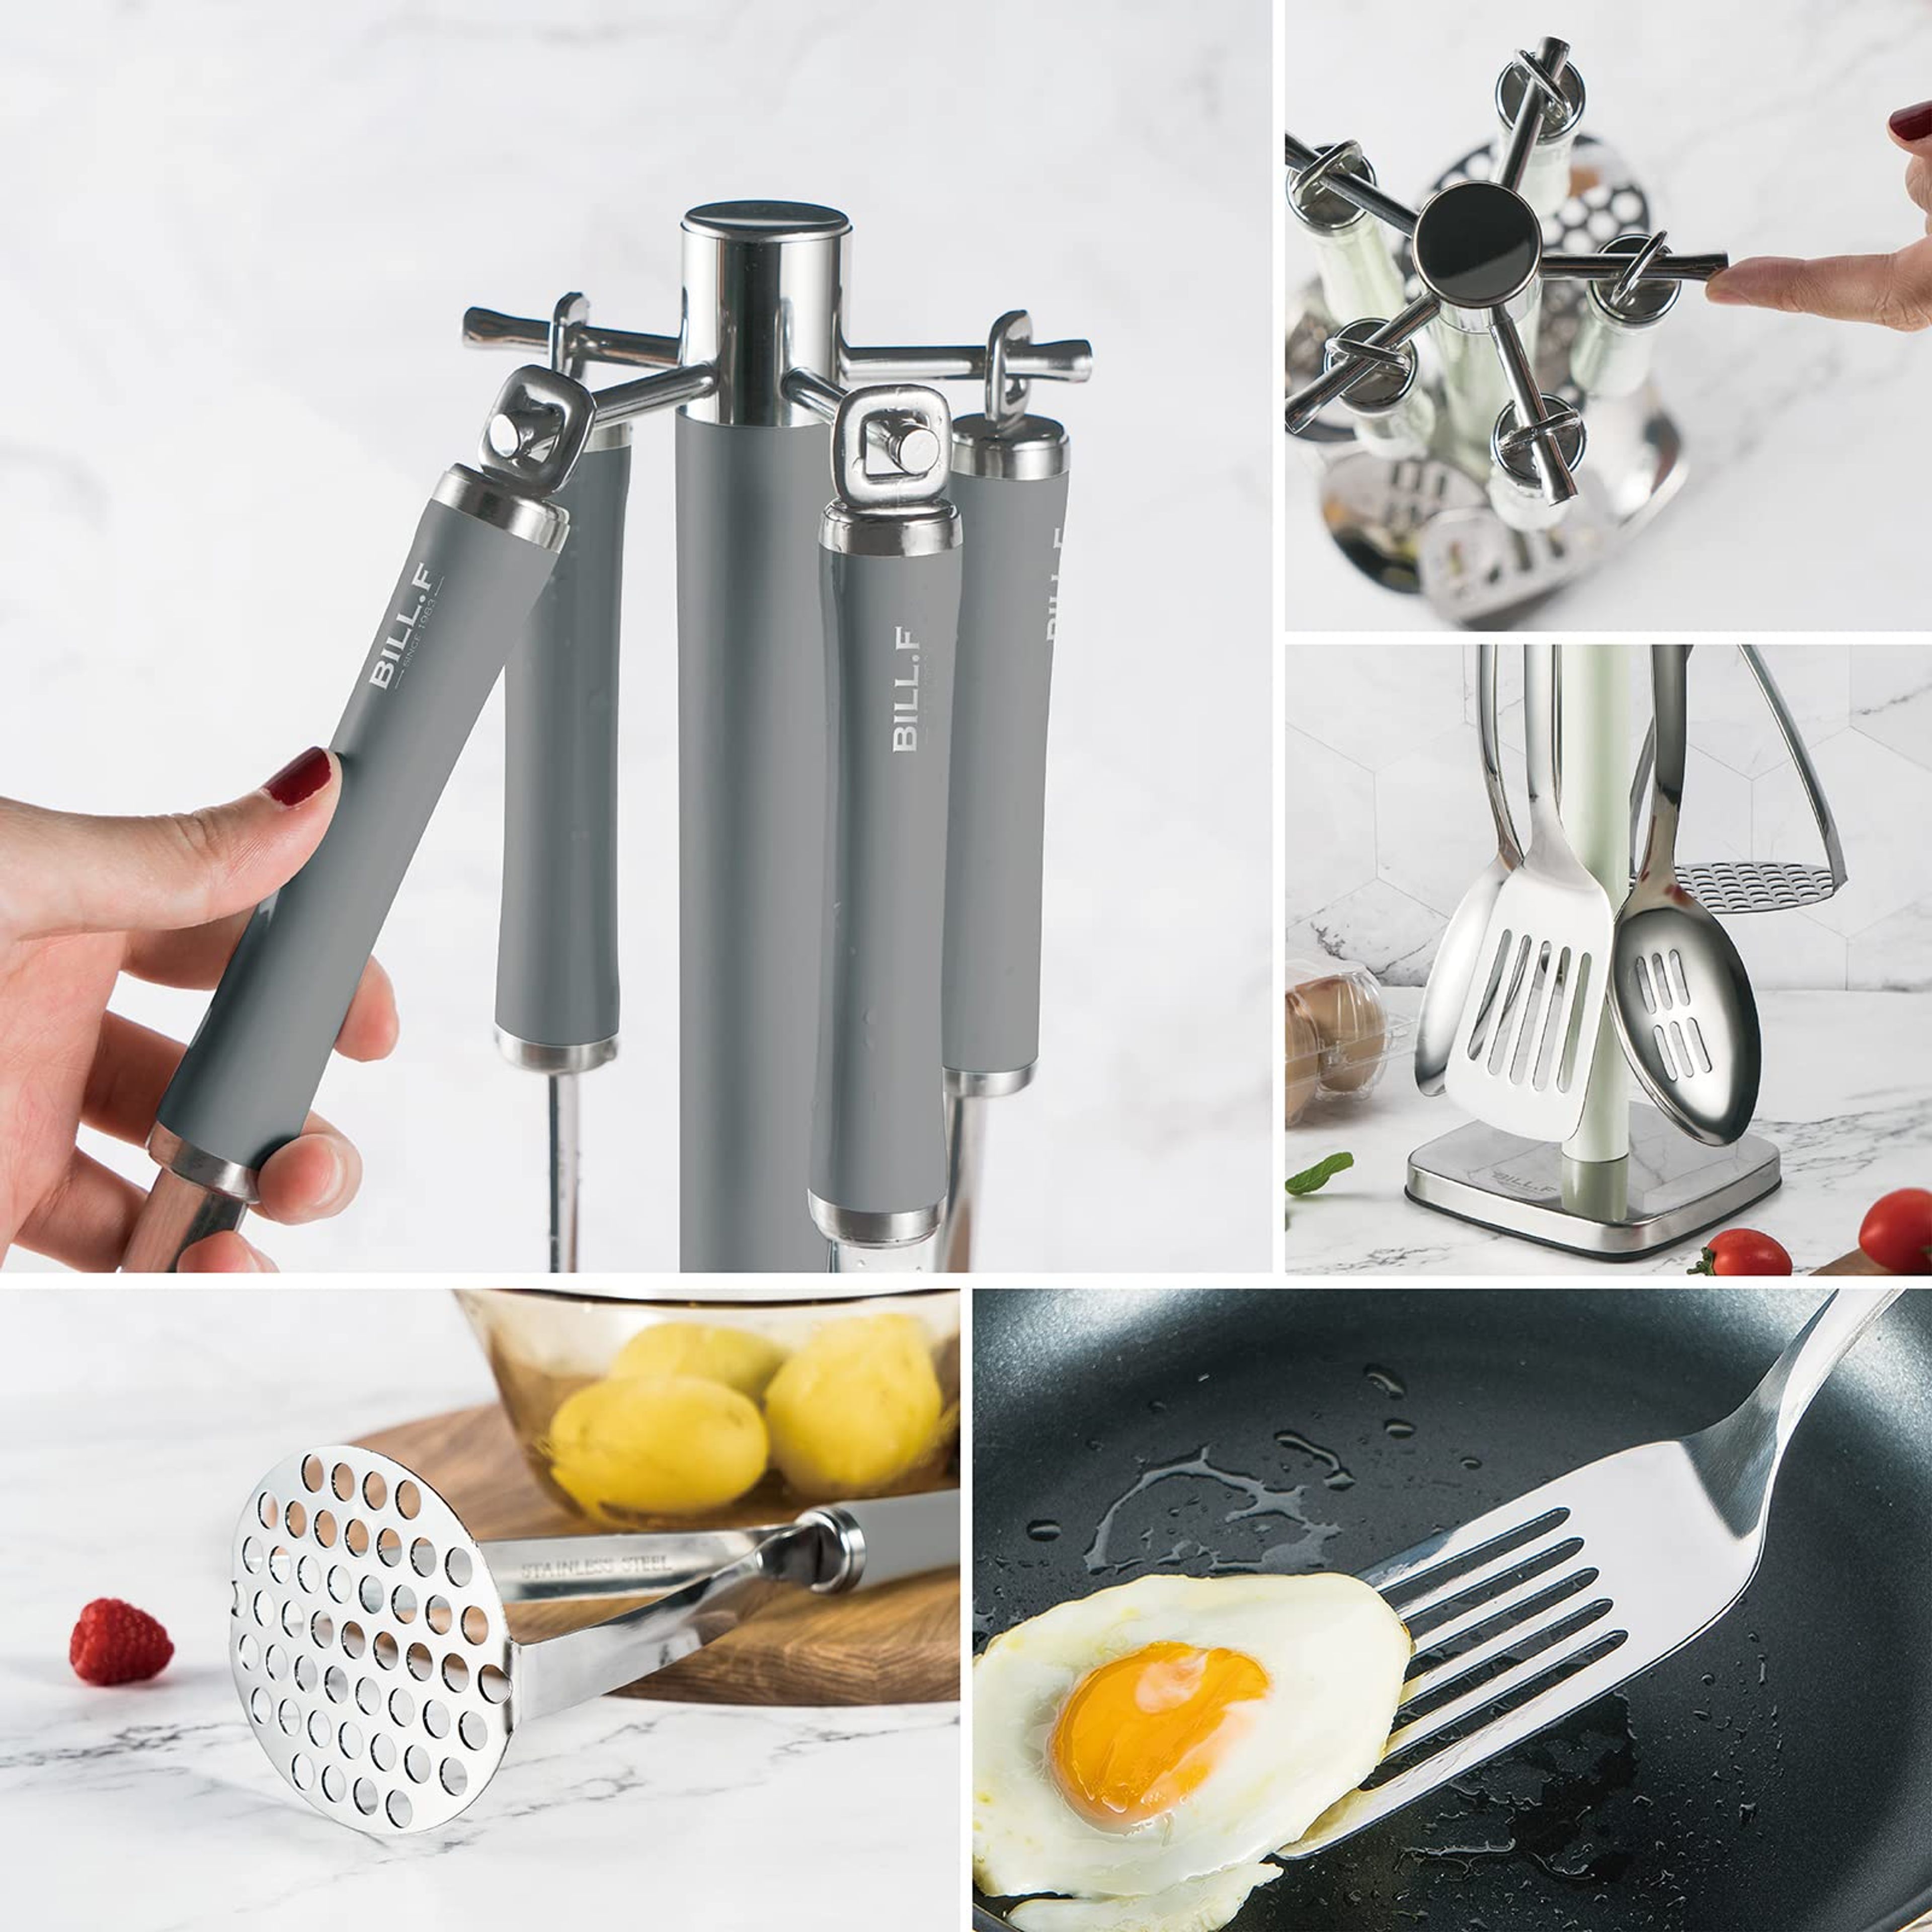 Cooking Utensil Set, 5 Piece Stainless Steel Kitchen Utensil Set, Kitchen Gadgets Cookware Set